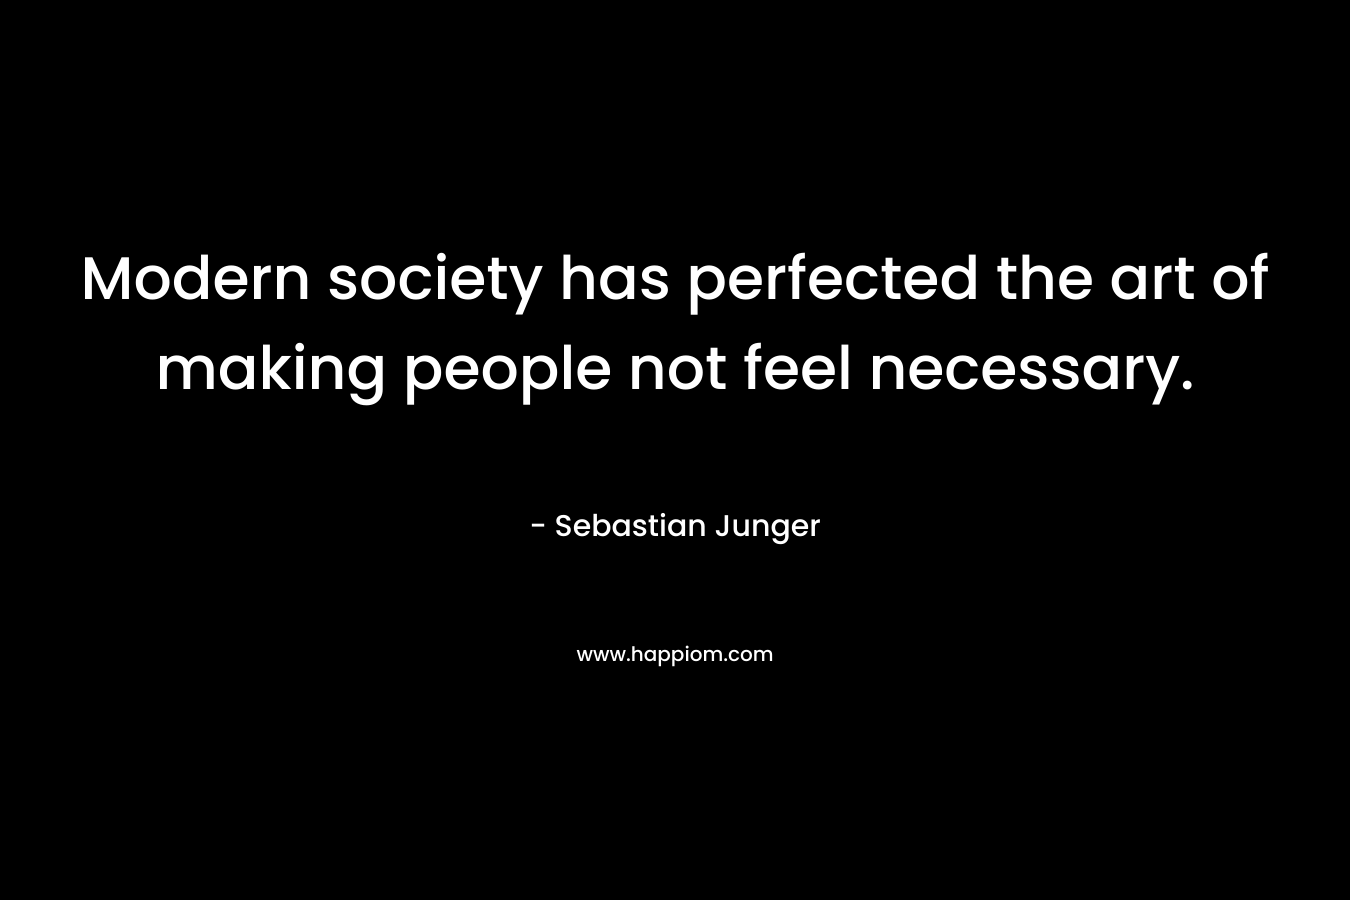 Modern society has perfected the art of making people not feel necessary. – Sebastian Junger